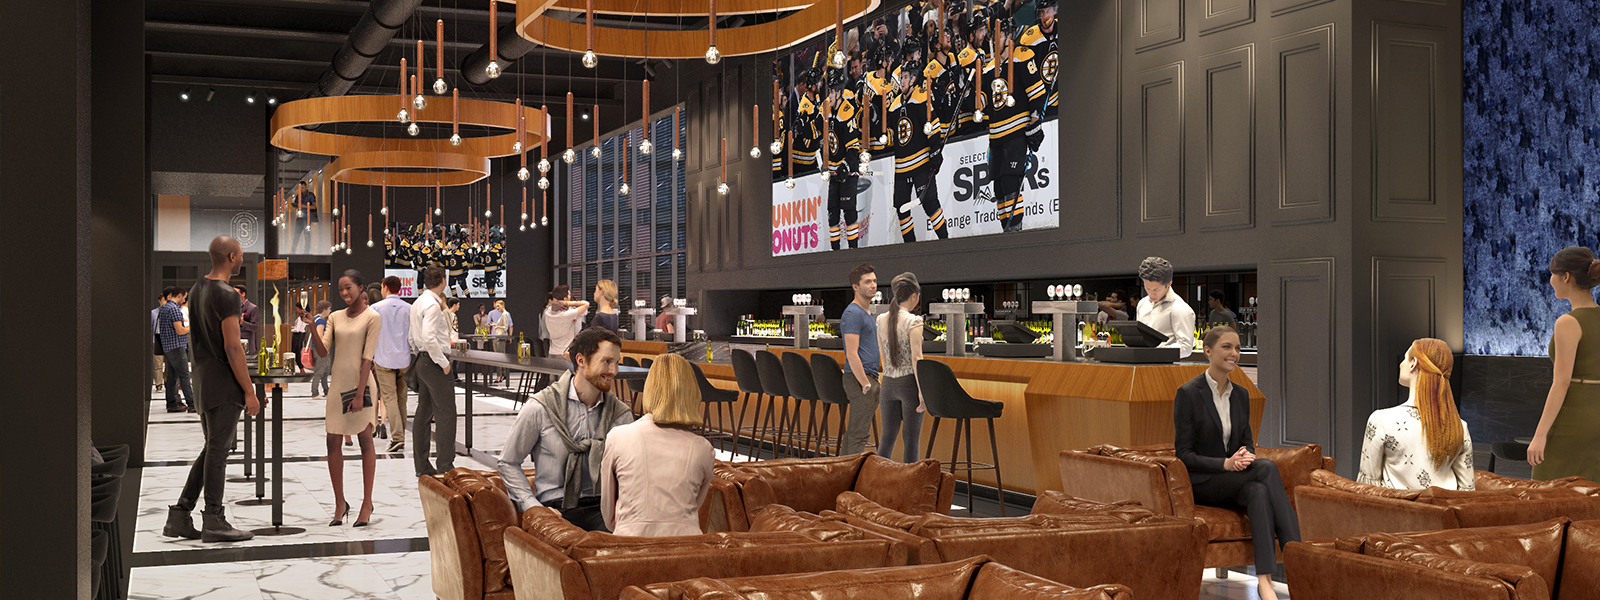 5 things to know about the $100 million upgrade to TD Garden